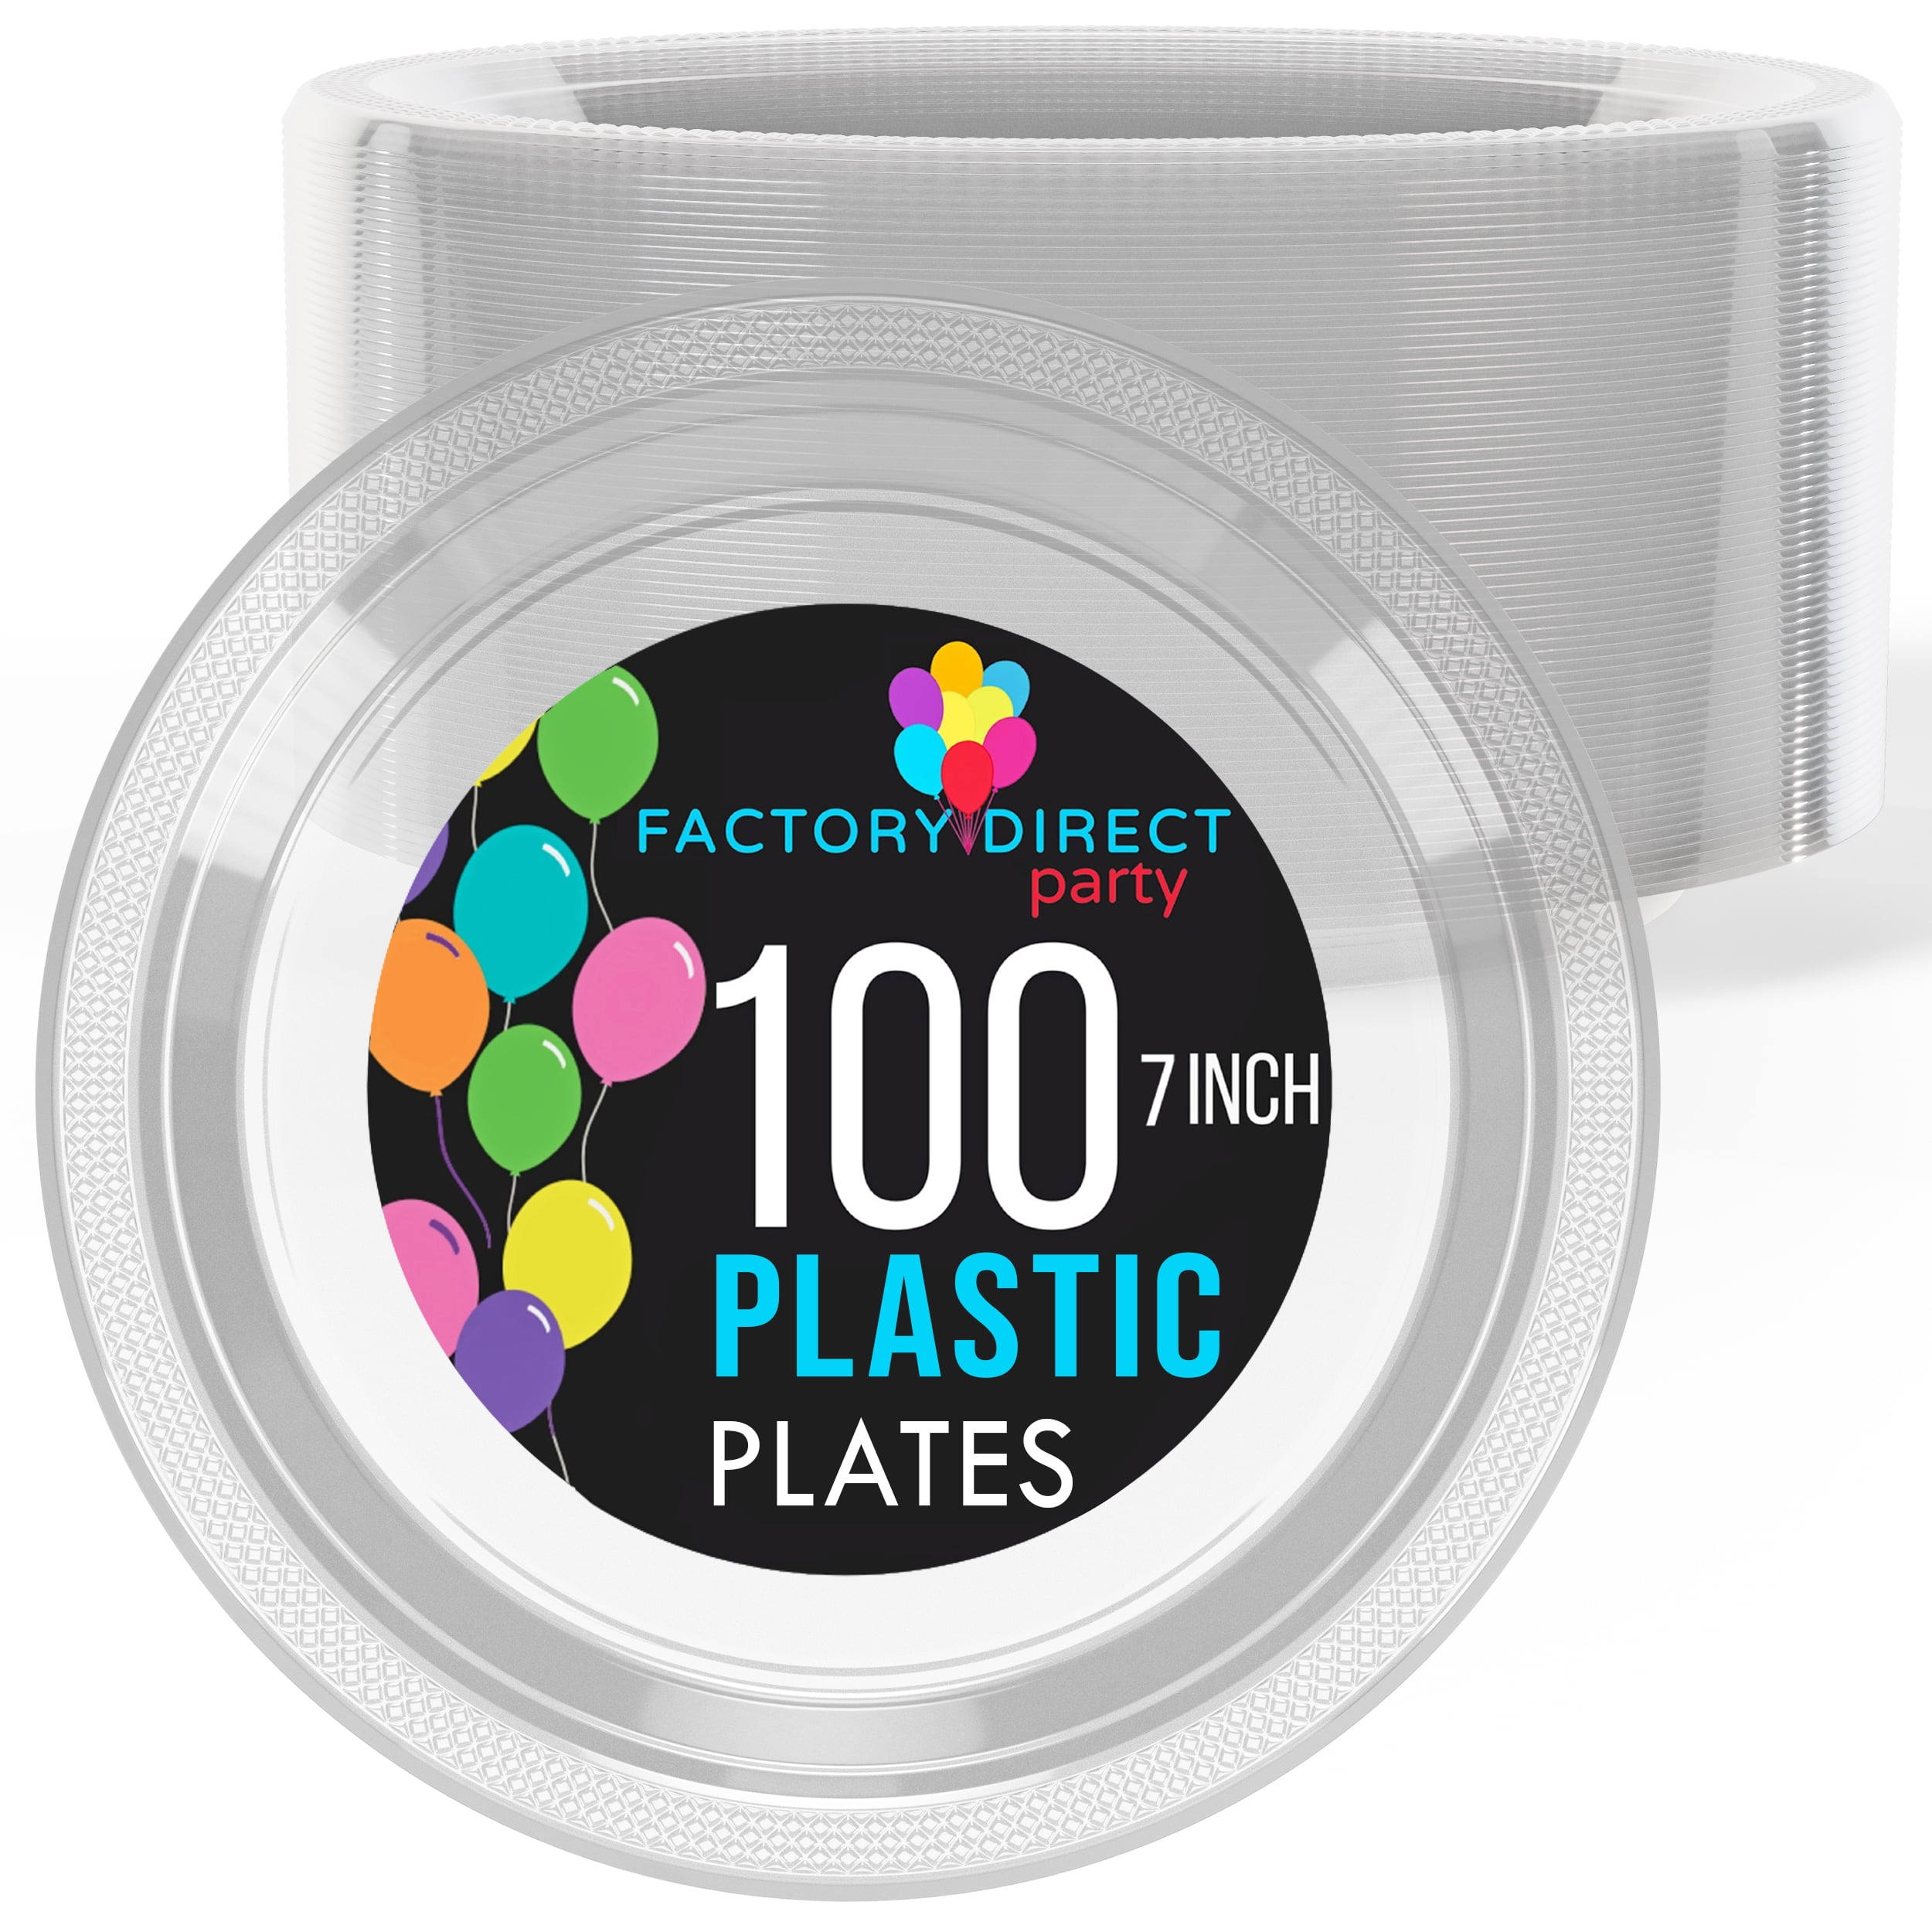 Plastic Plates 7 Coral (20 Pack)